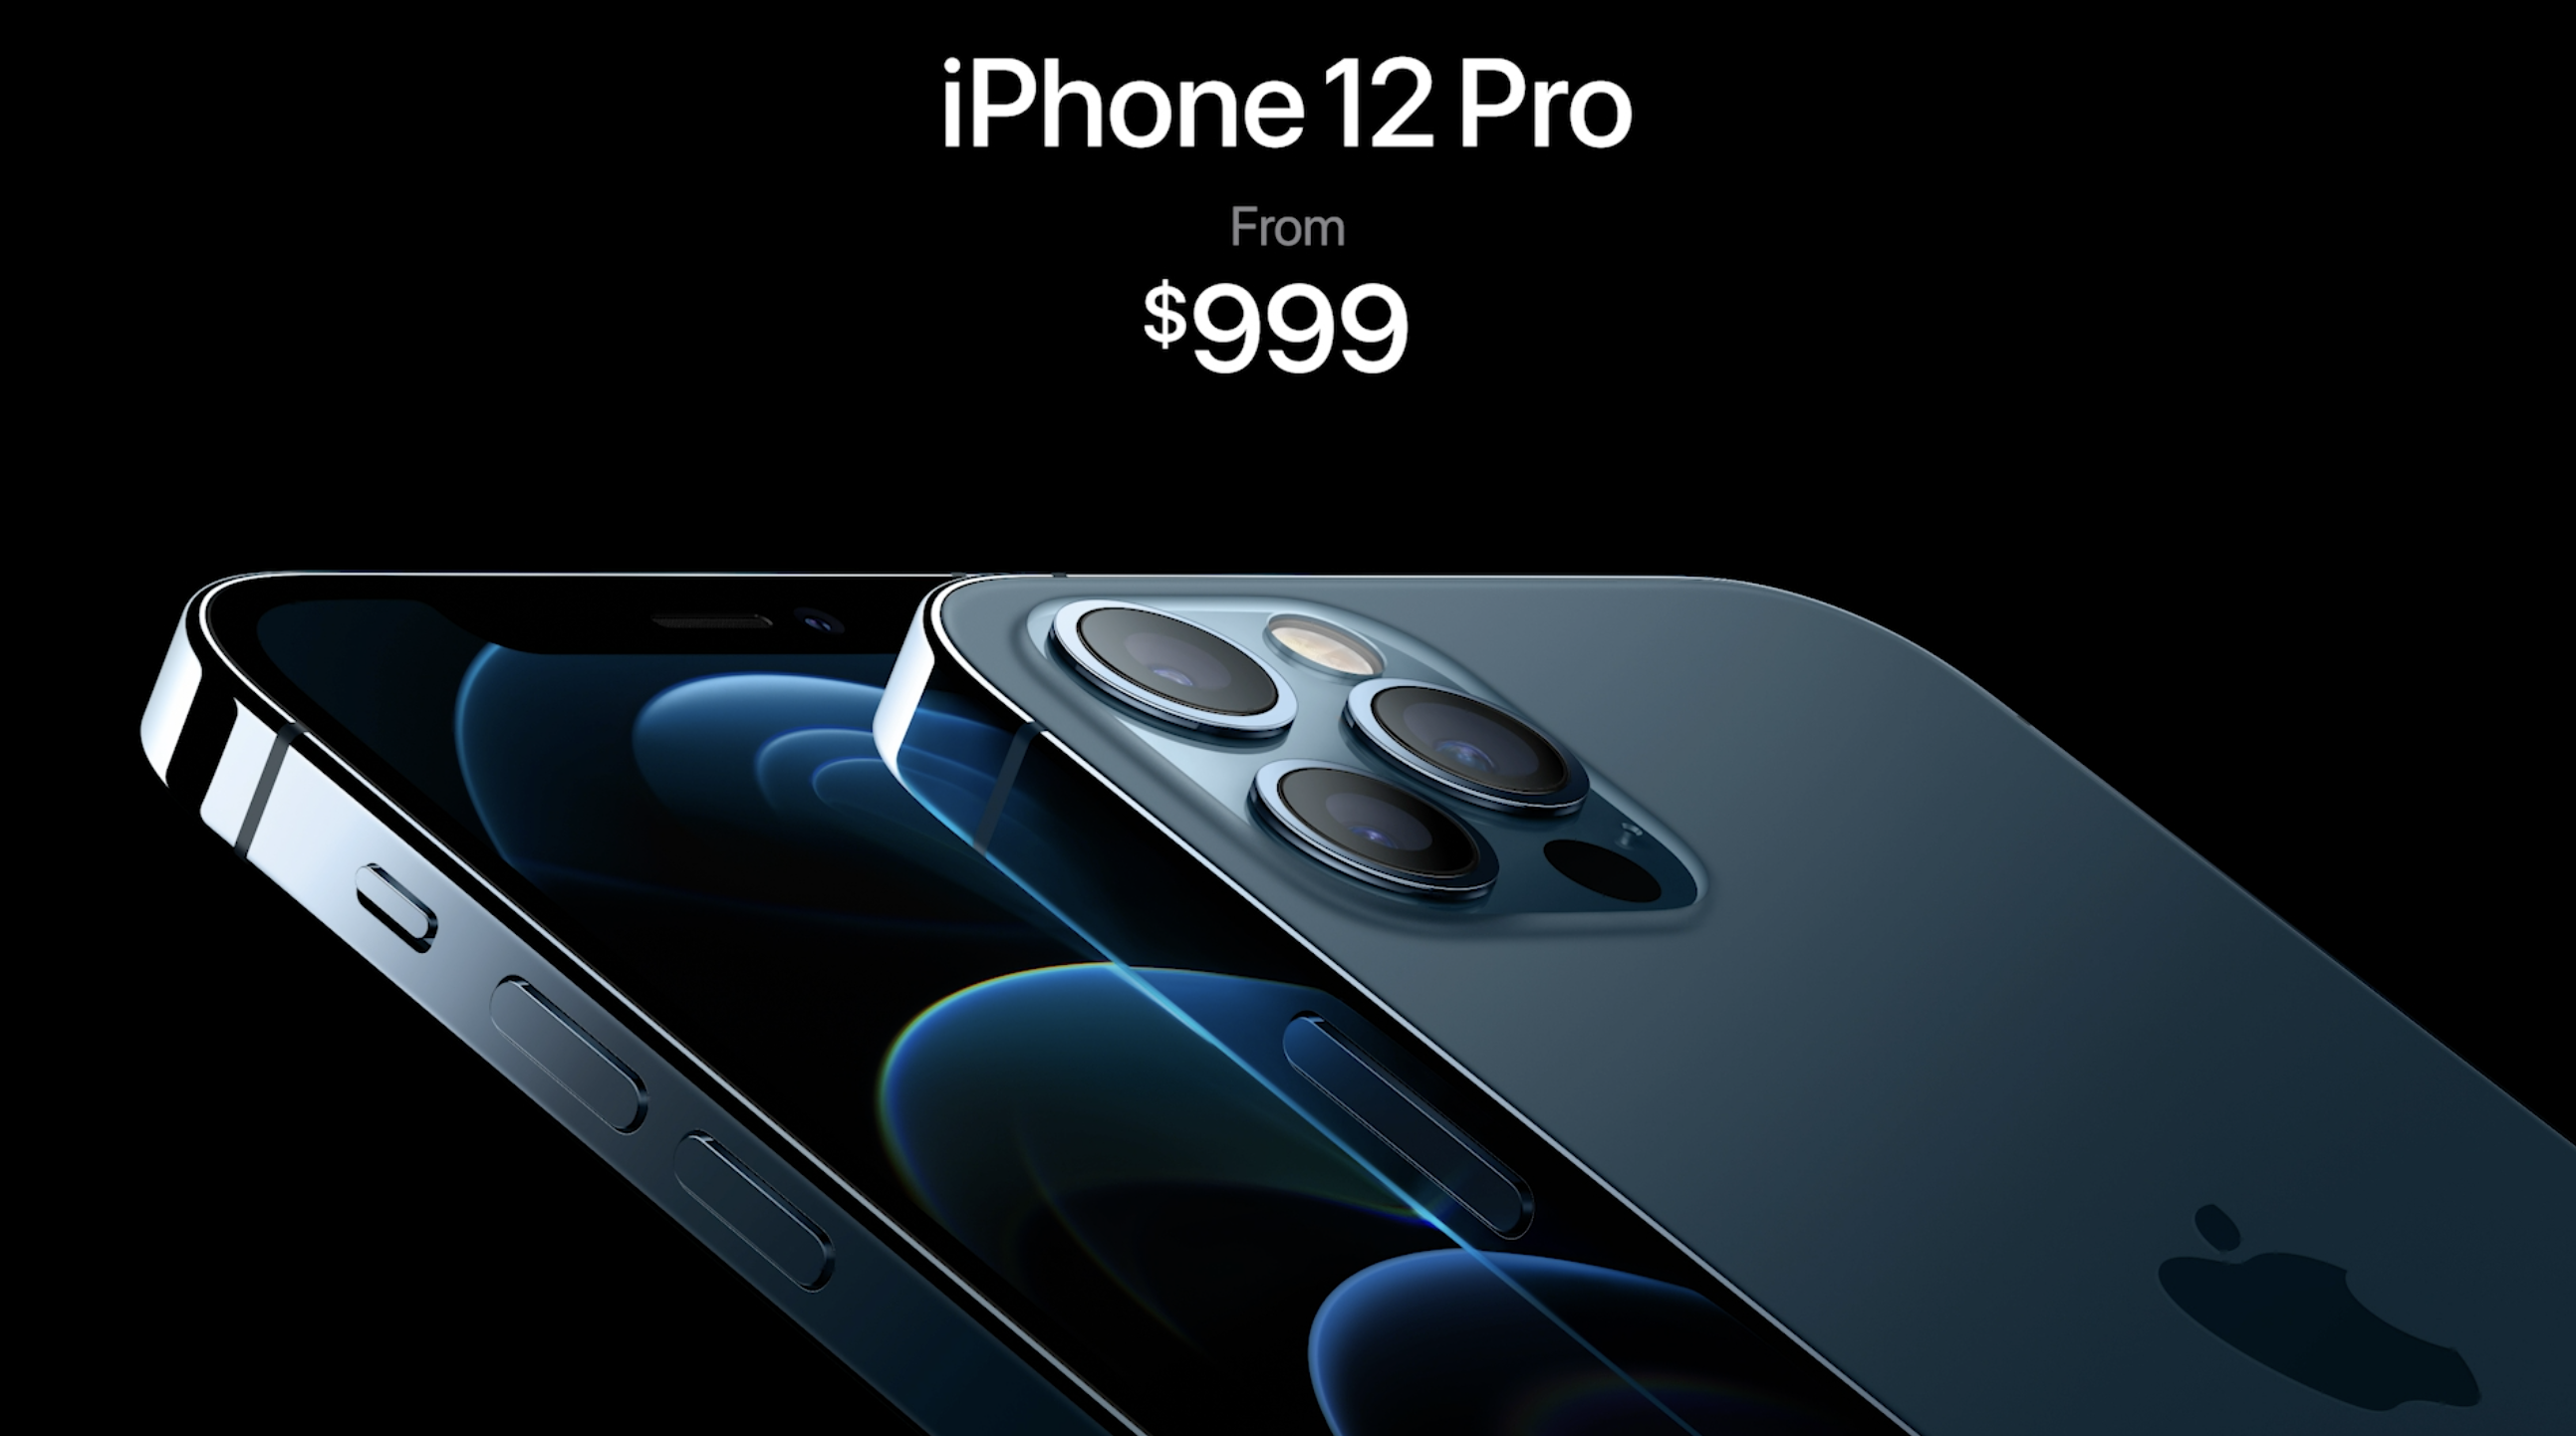 Iphone 12 Pro Shipping Times Slip To November Select Iphone 12 Models Still Available For Day 1 Delivery 9to5mac